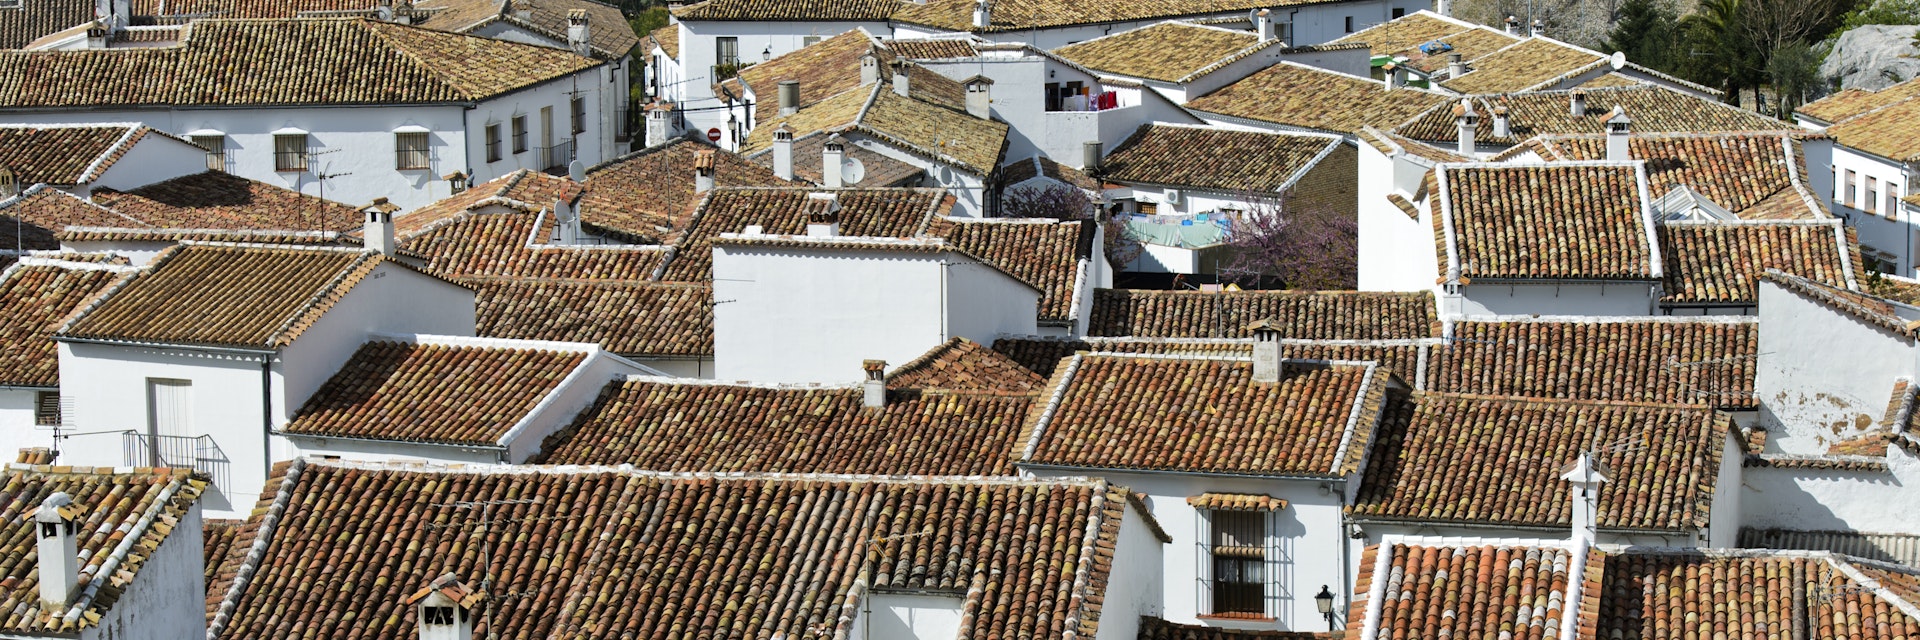 roofs of the White Town Grazalema